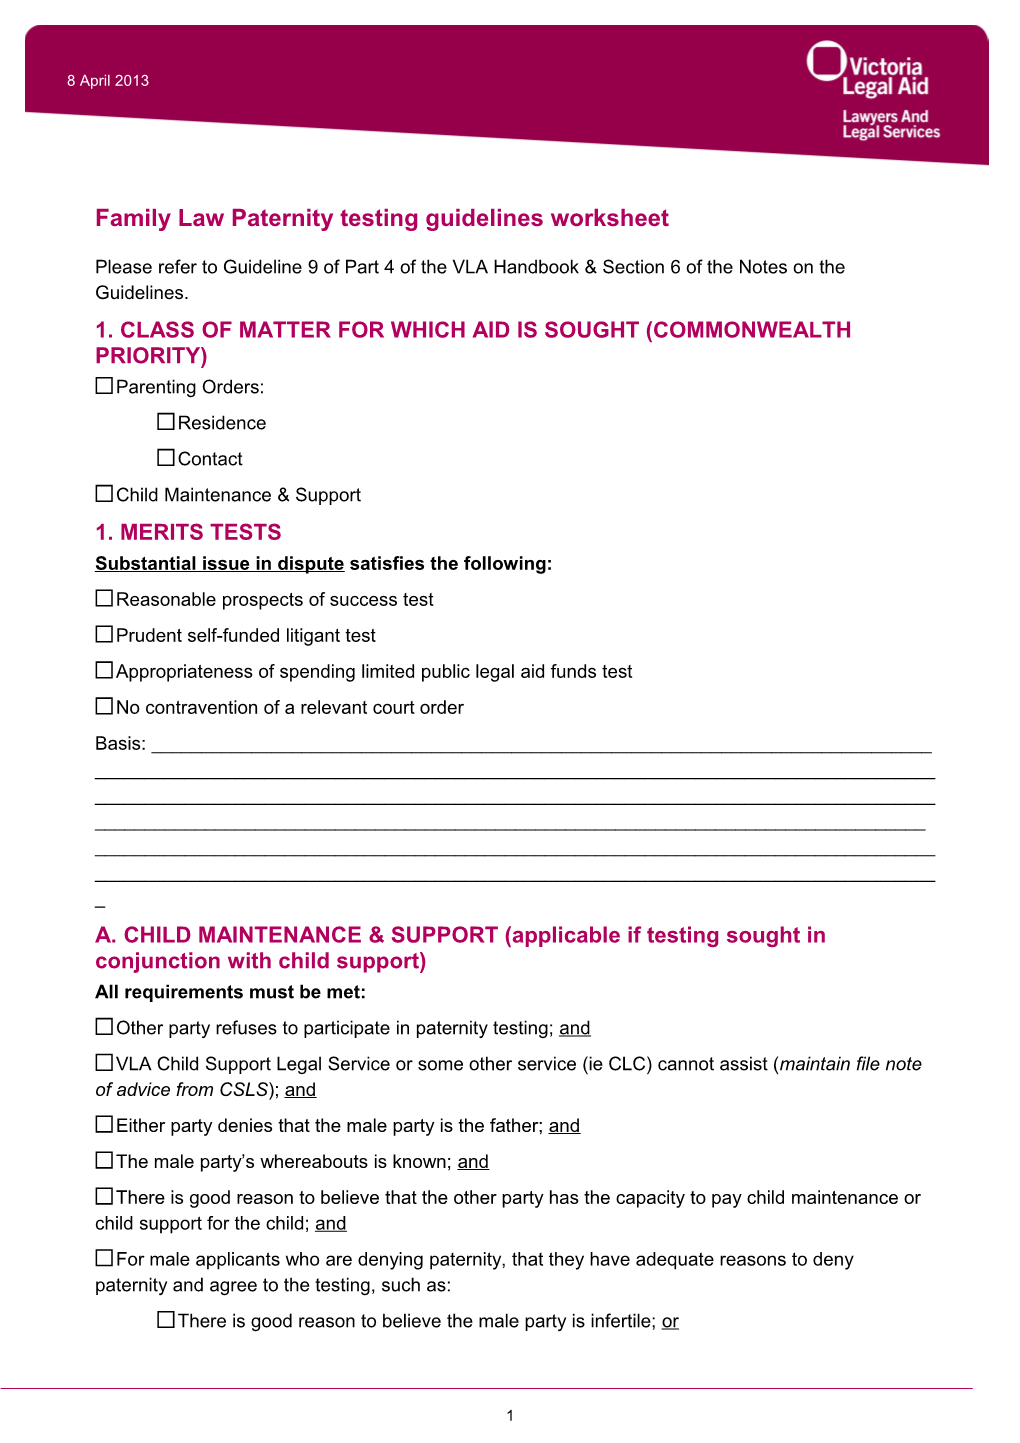 Family Law Paternity Testing Guidelines Worksheet